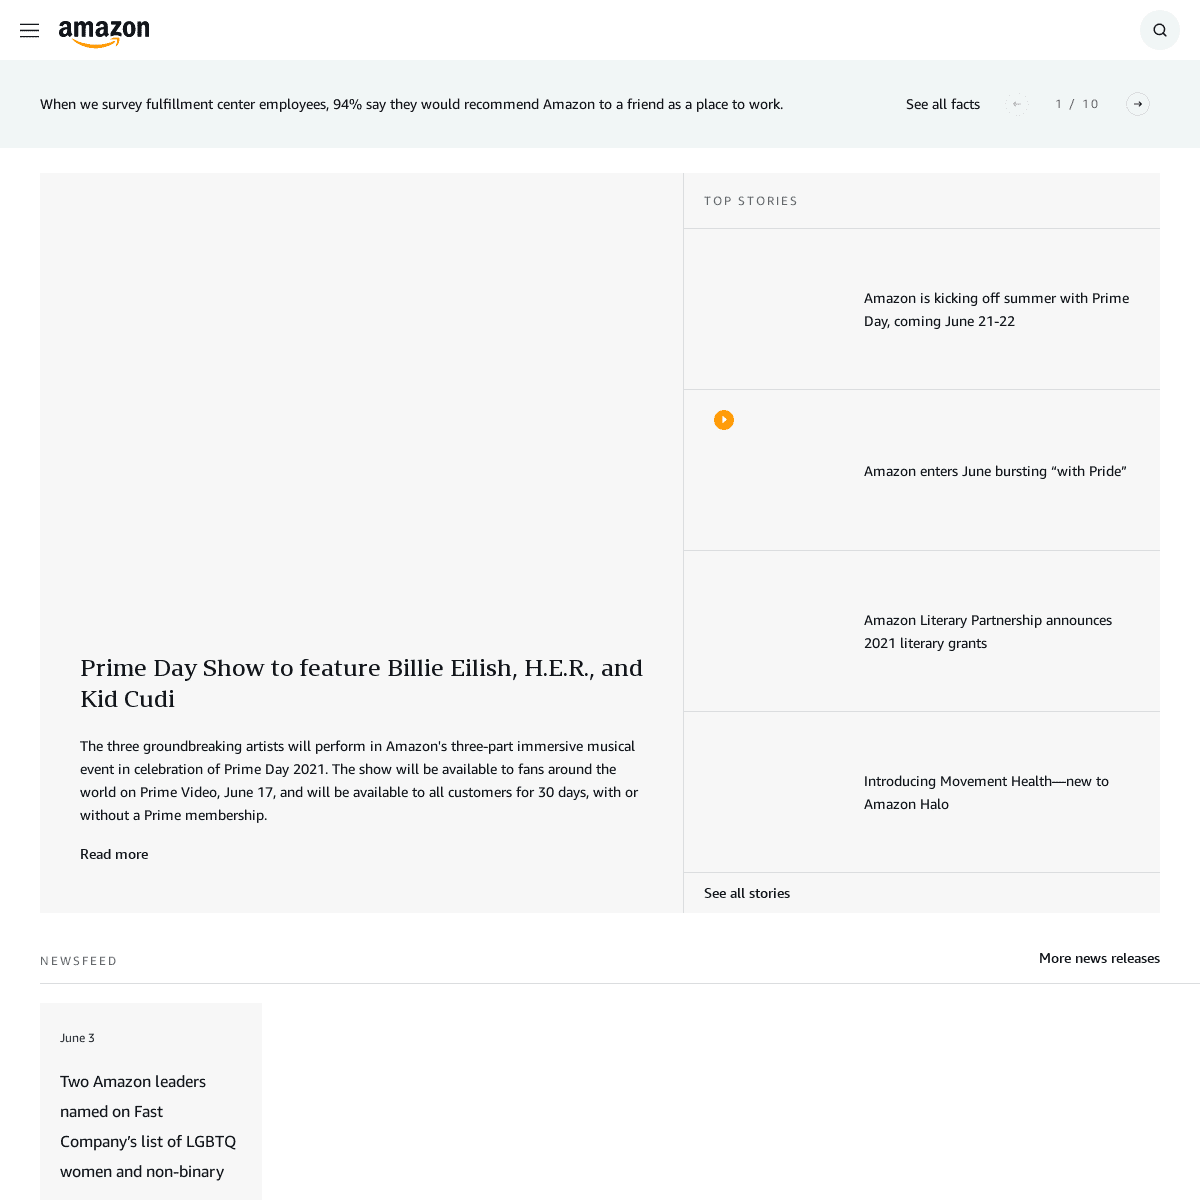 A complete backup of https://aboutamazon.com